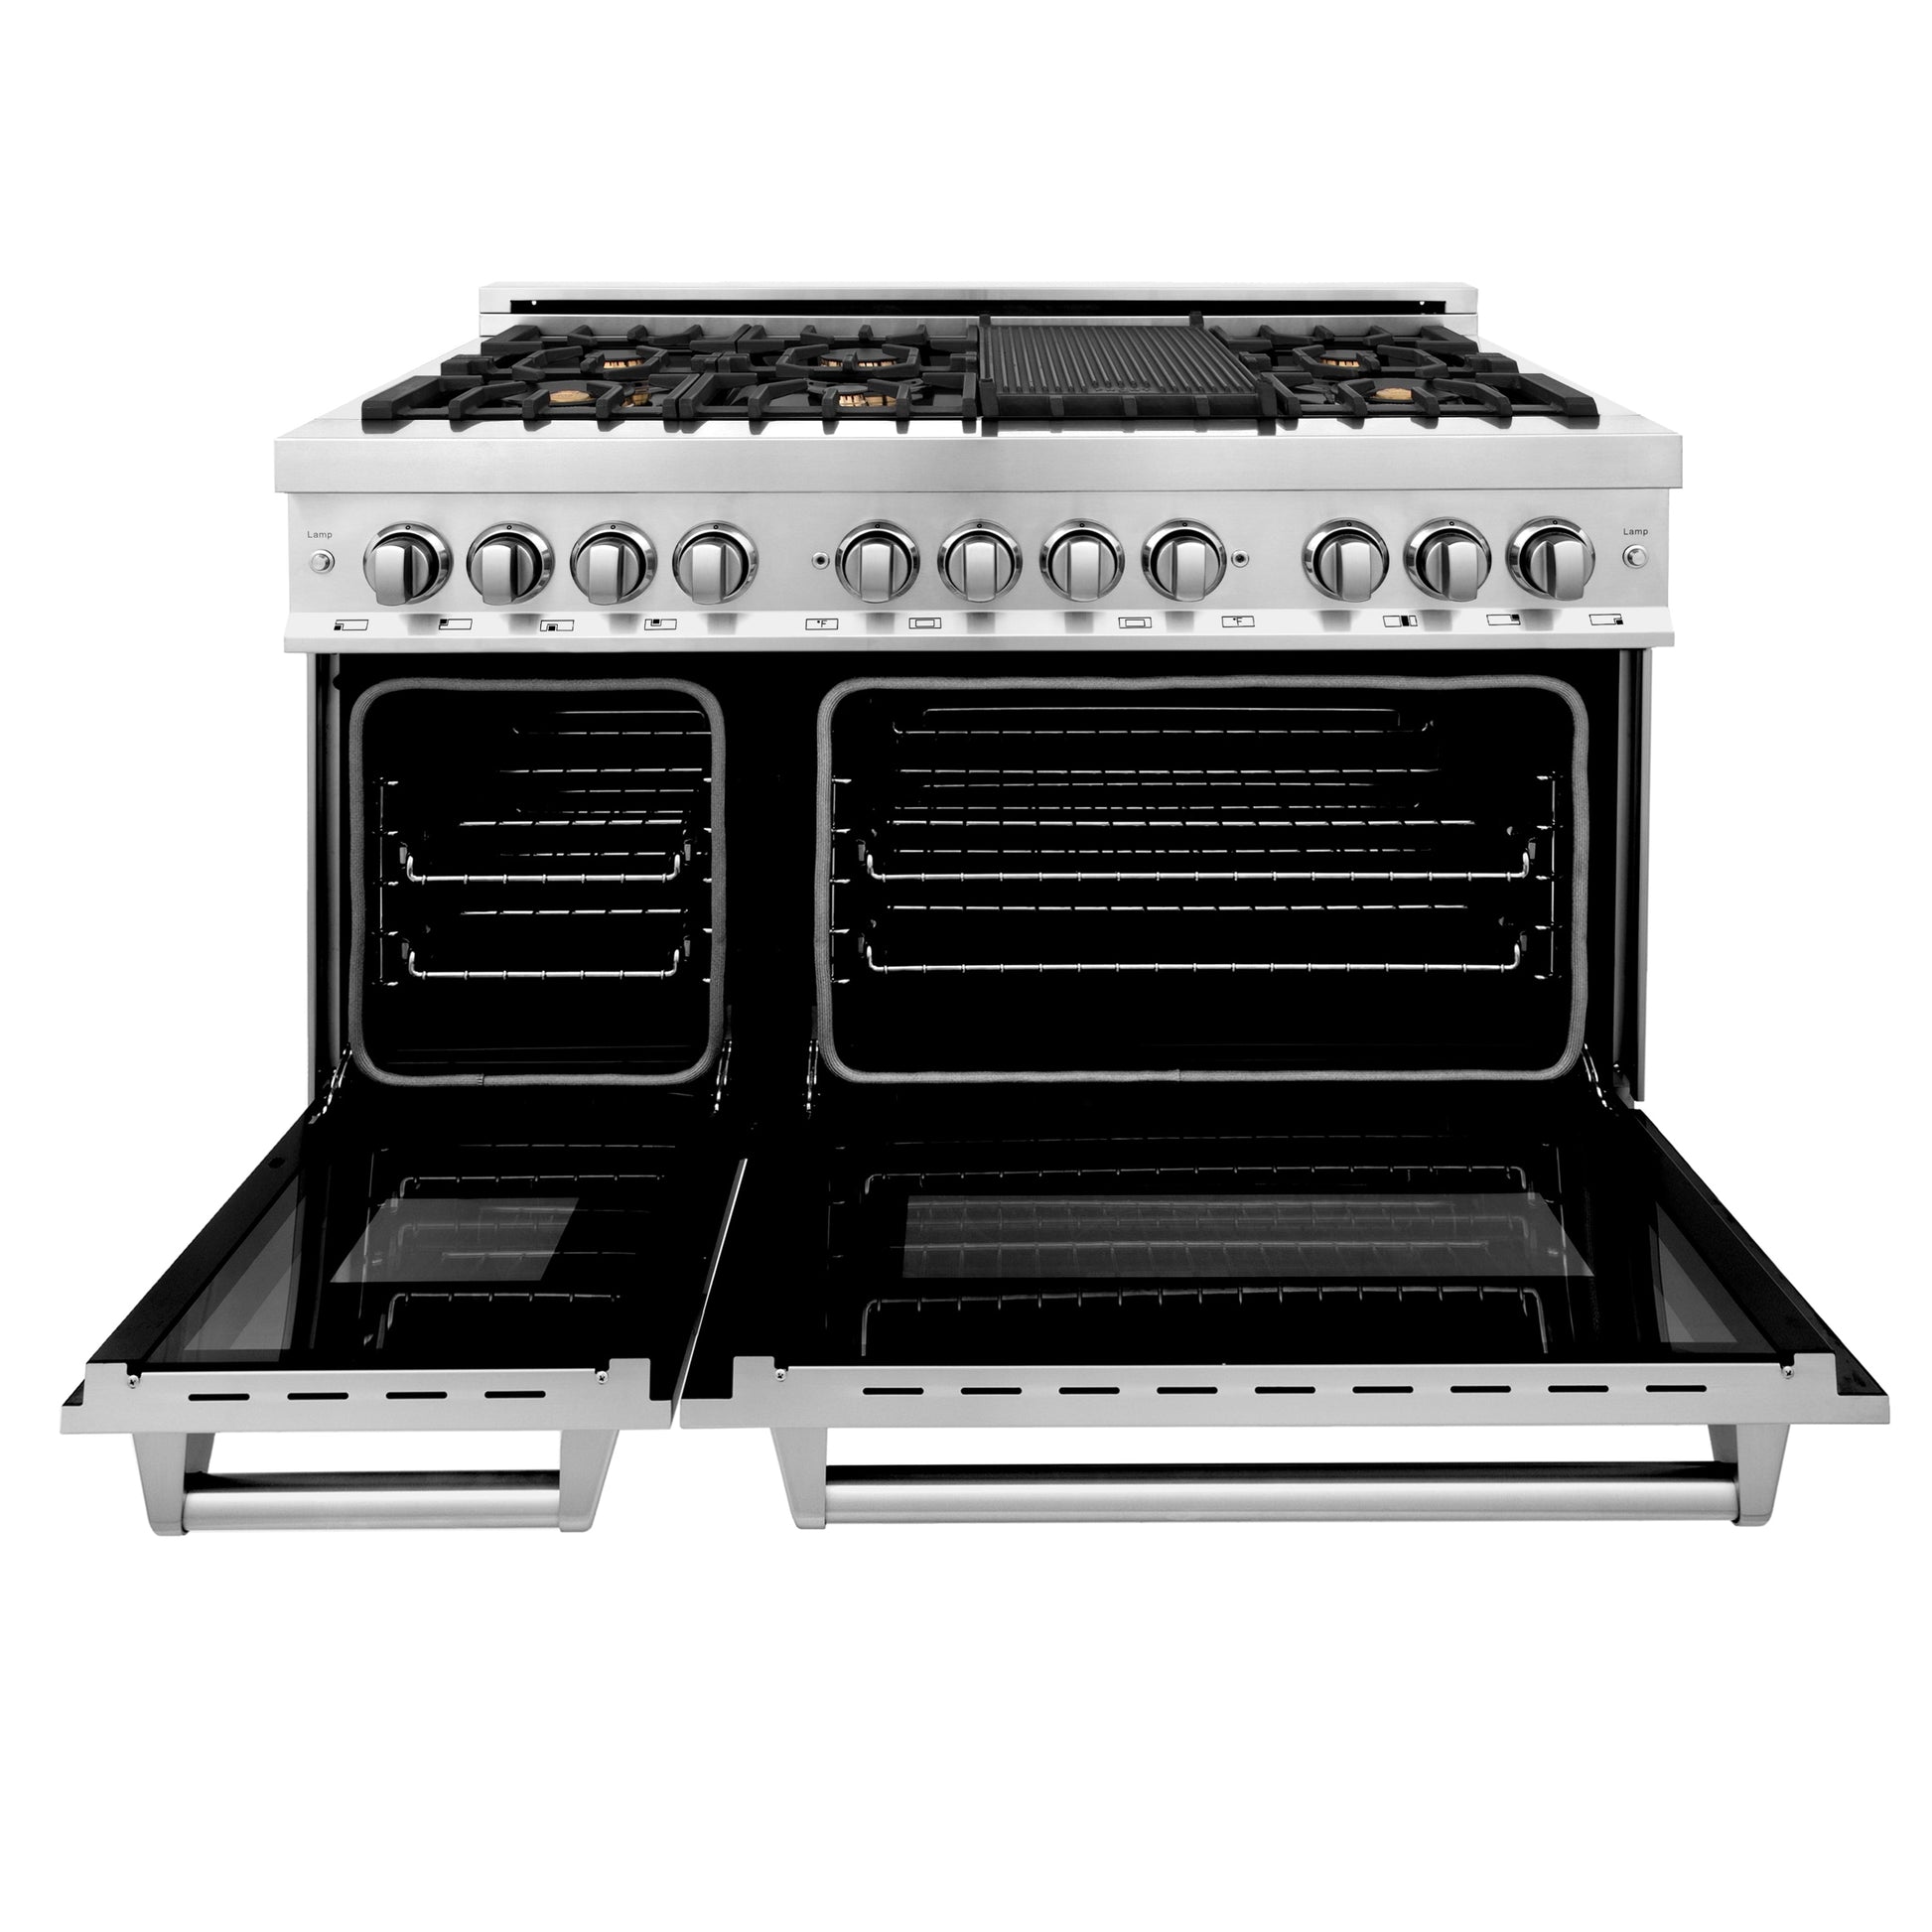 ZLINE 48" Dual Fuel Range with Electric Oven and Gas Cooktop with Griddle - Stainless Steel with Brass Burners